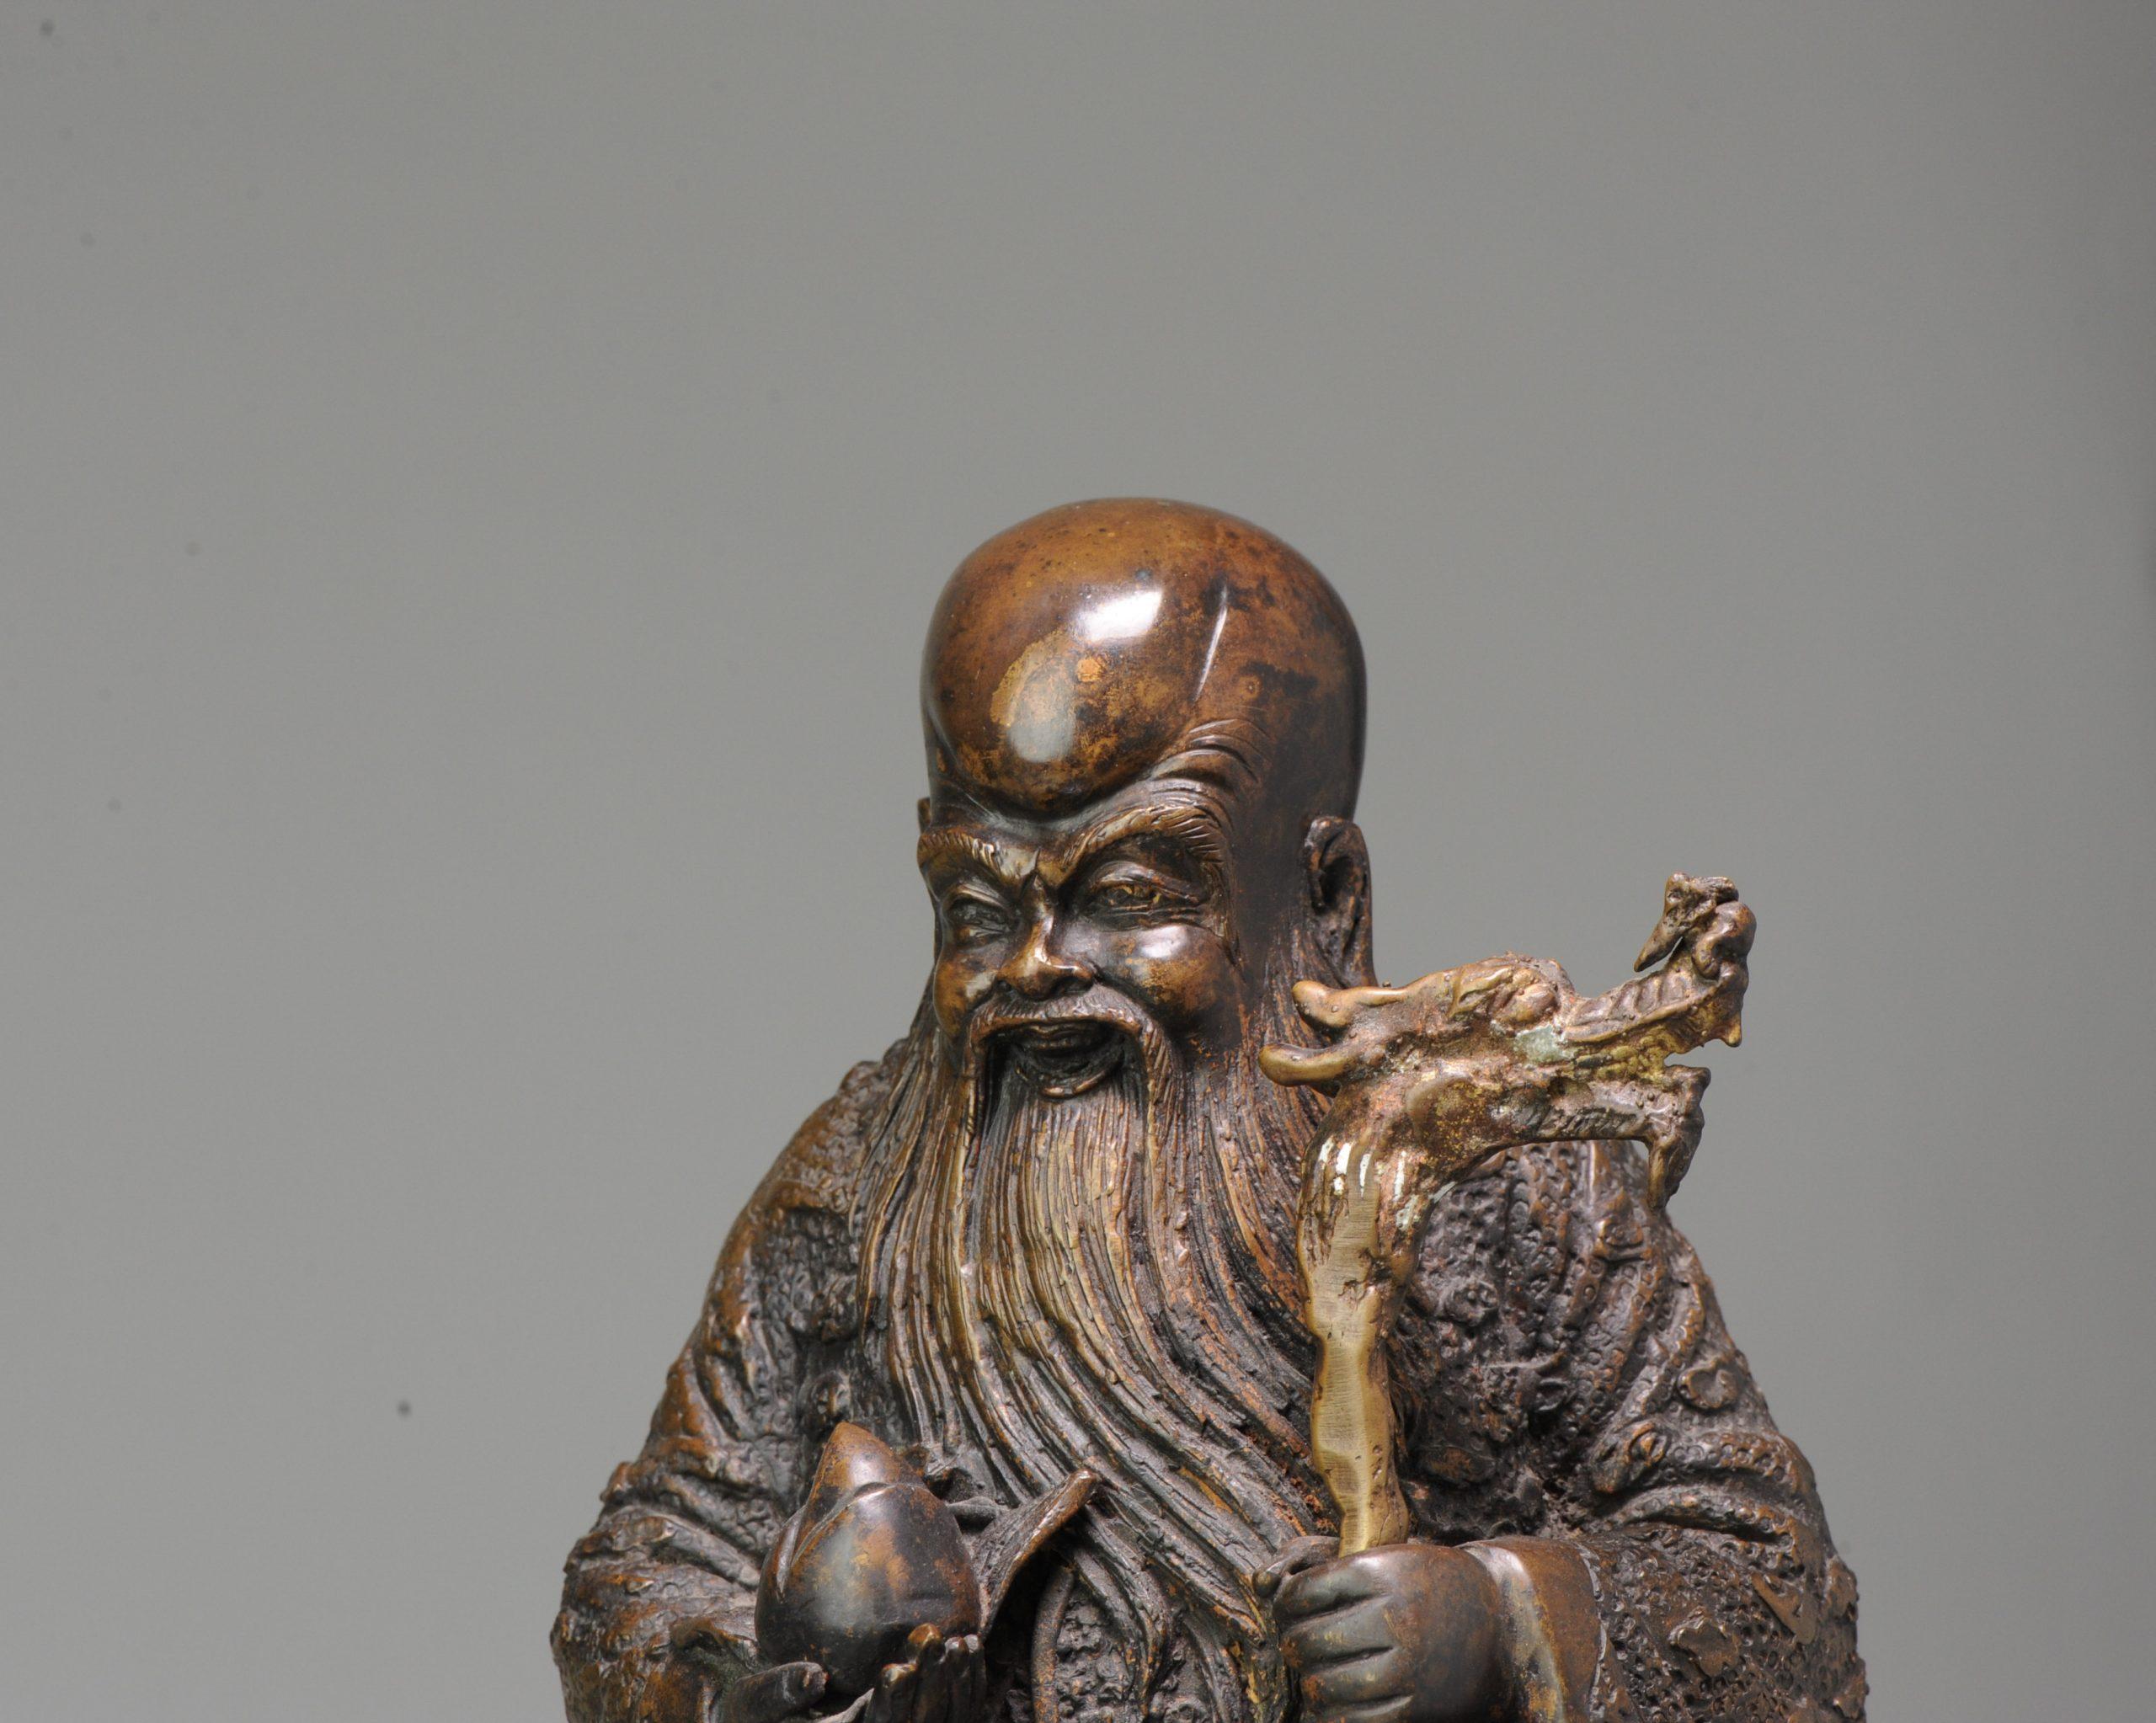 Description
Nicely made artifact dating to the 19th or 20th century. Depicting Shou Lao the god of immortality on a mythical